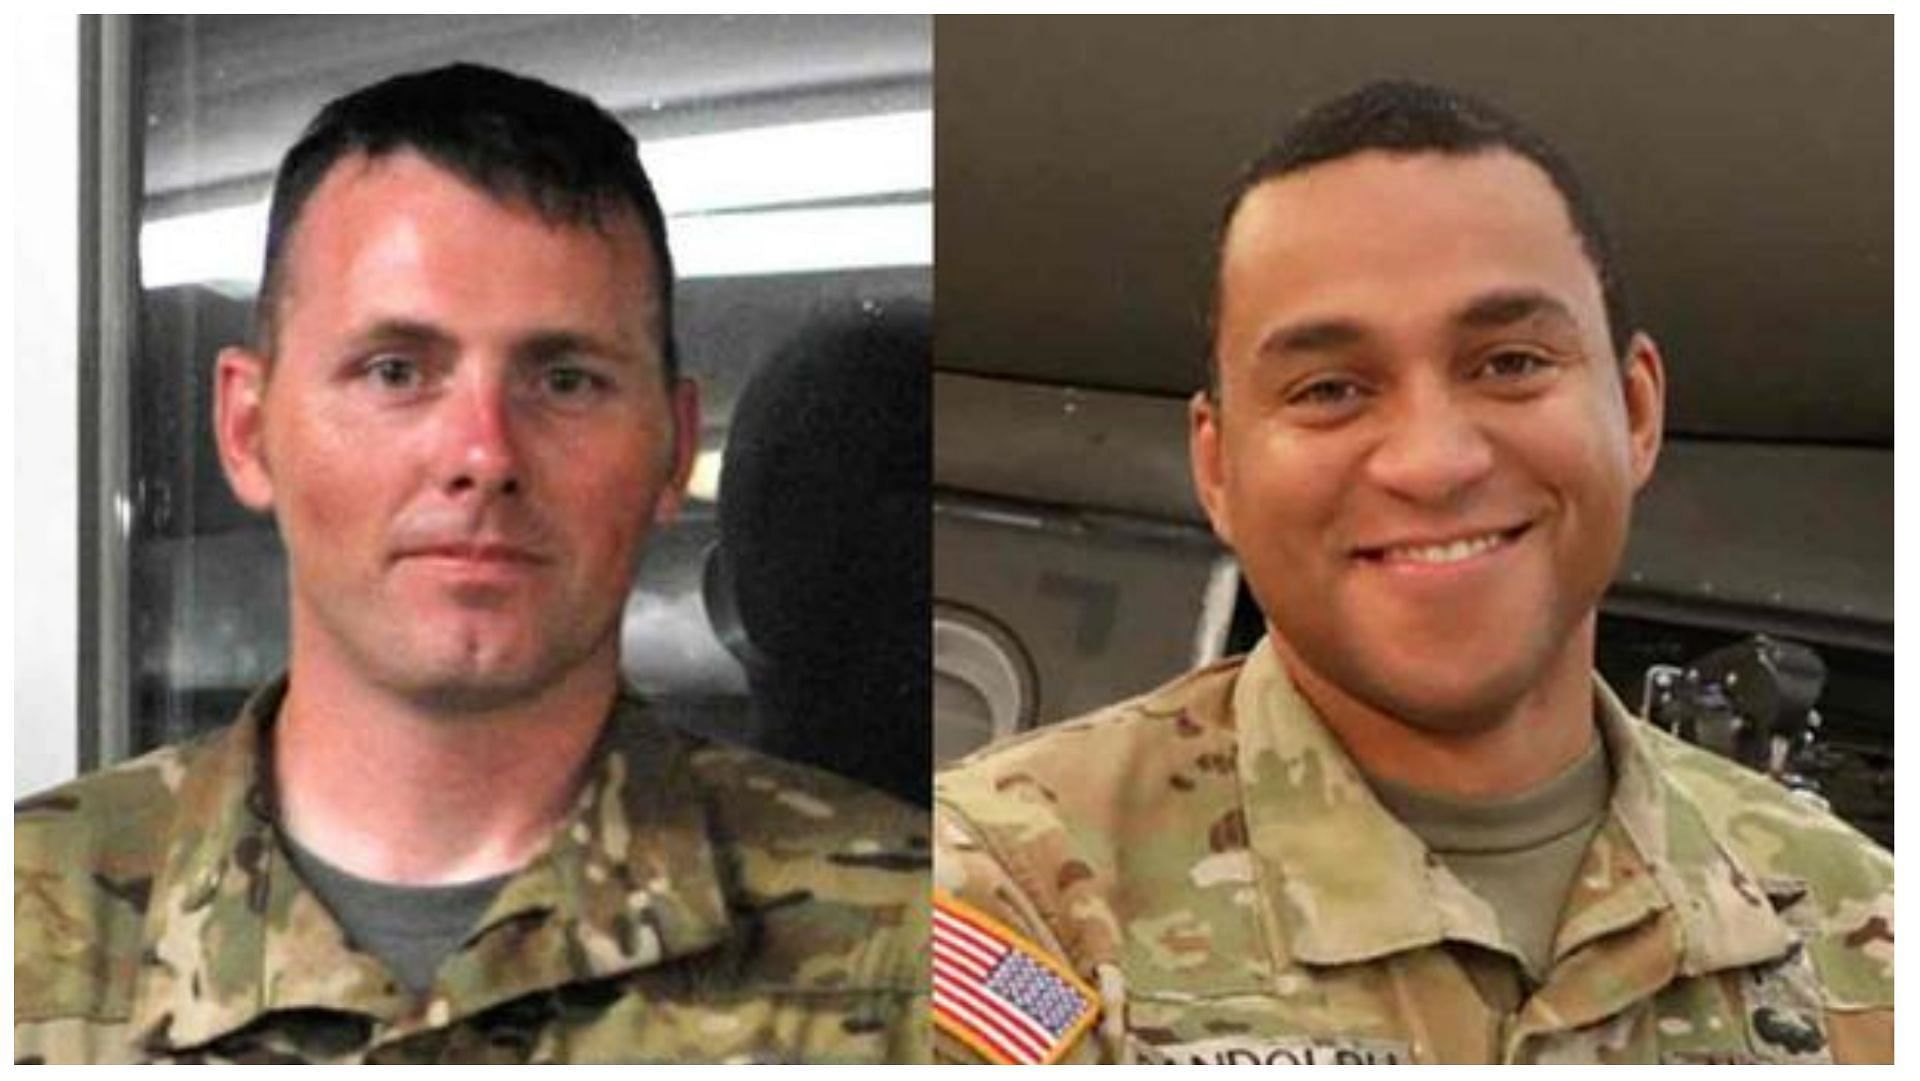 Wadham and Rudolph were both Chief Warrant Officers (image via US Military/Military.com)